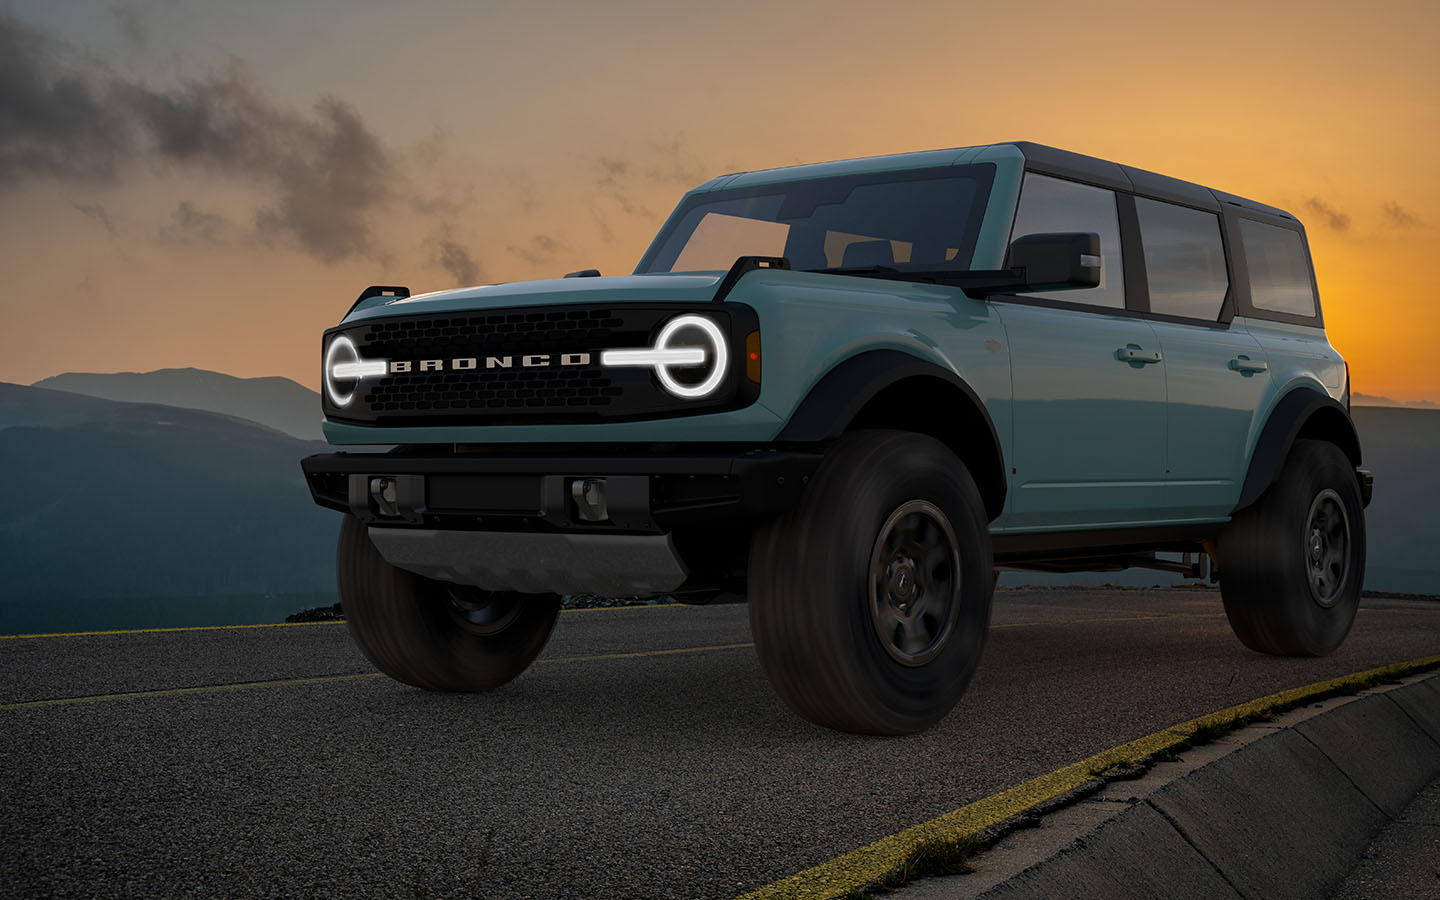 Let’s go through ford bronco history and facts